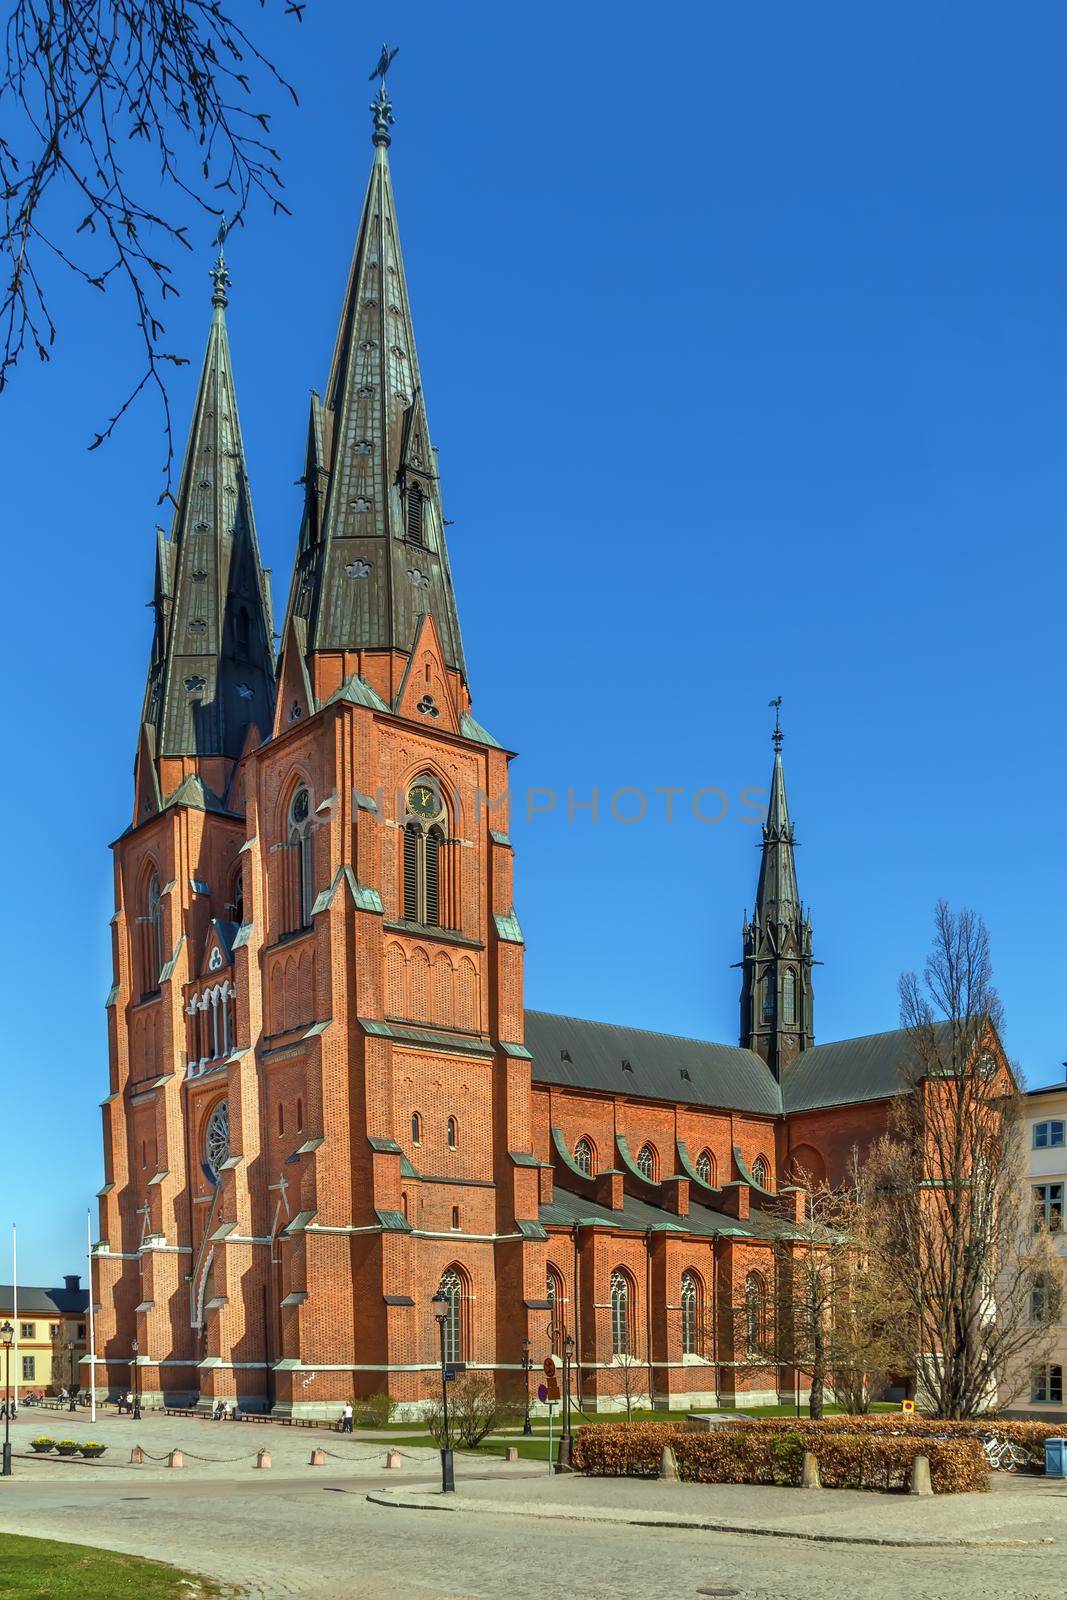 The Uppsala Cathedral is a cathedral located in the centre of Uppsala. The cathedral dates back to the late 13th century.